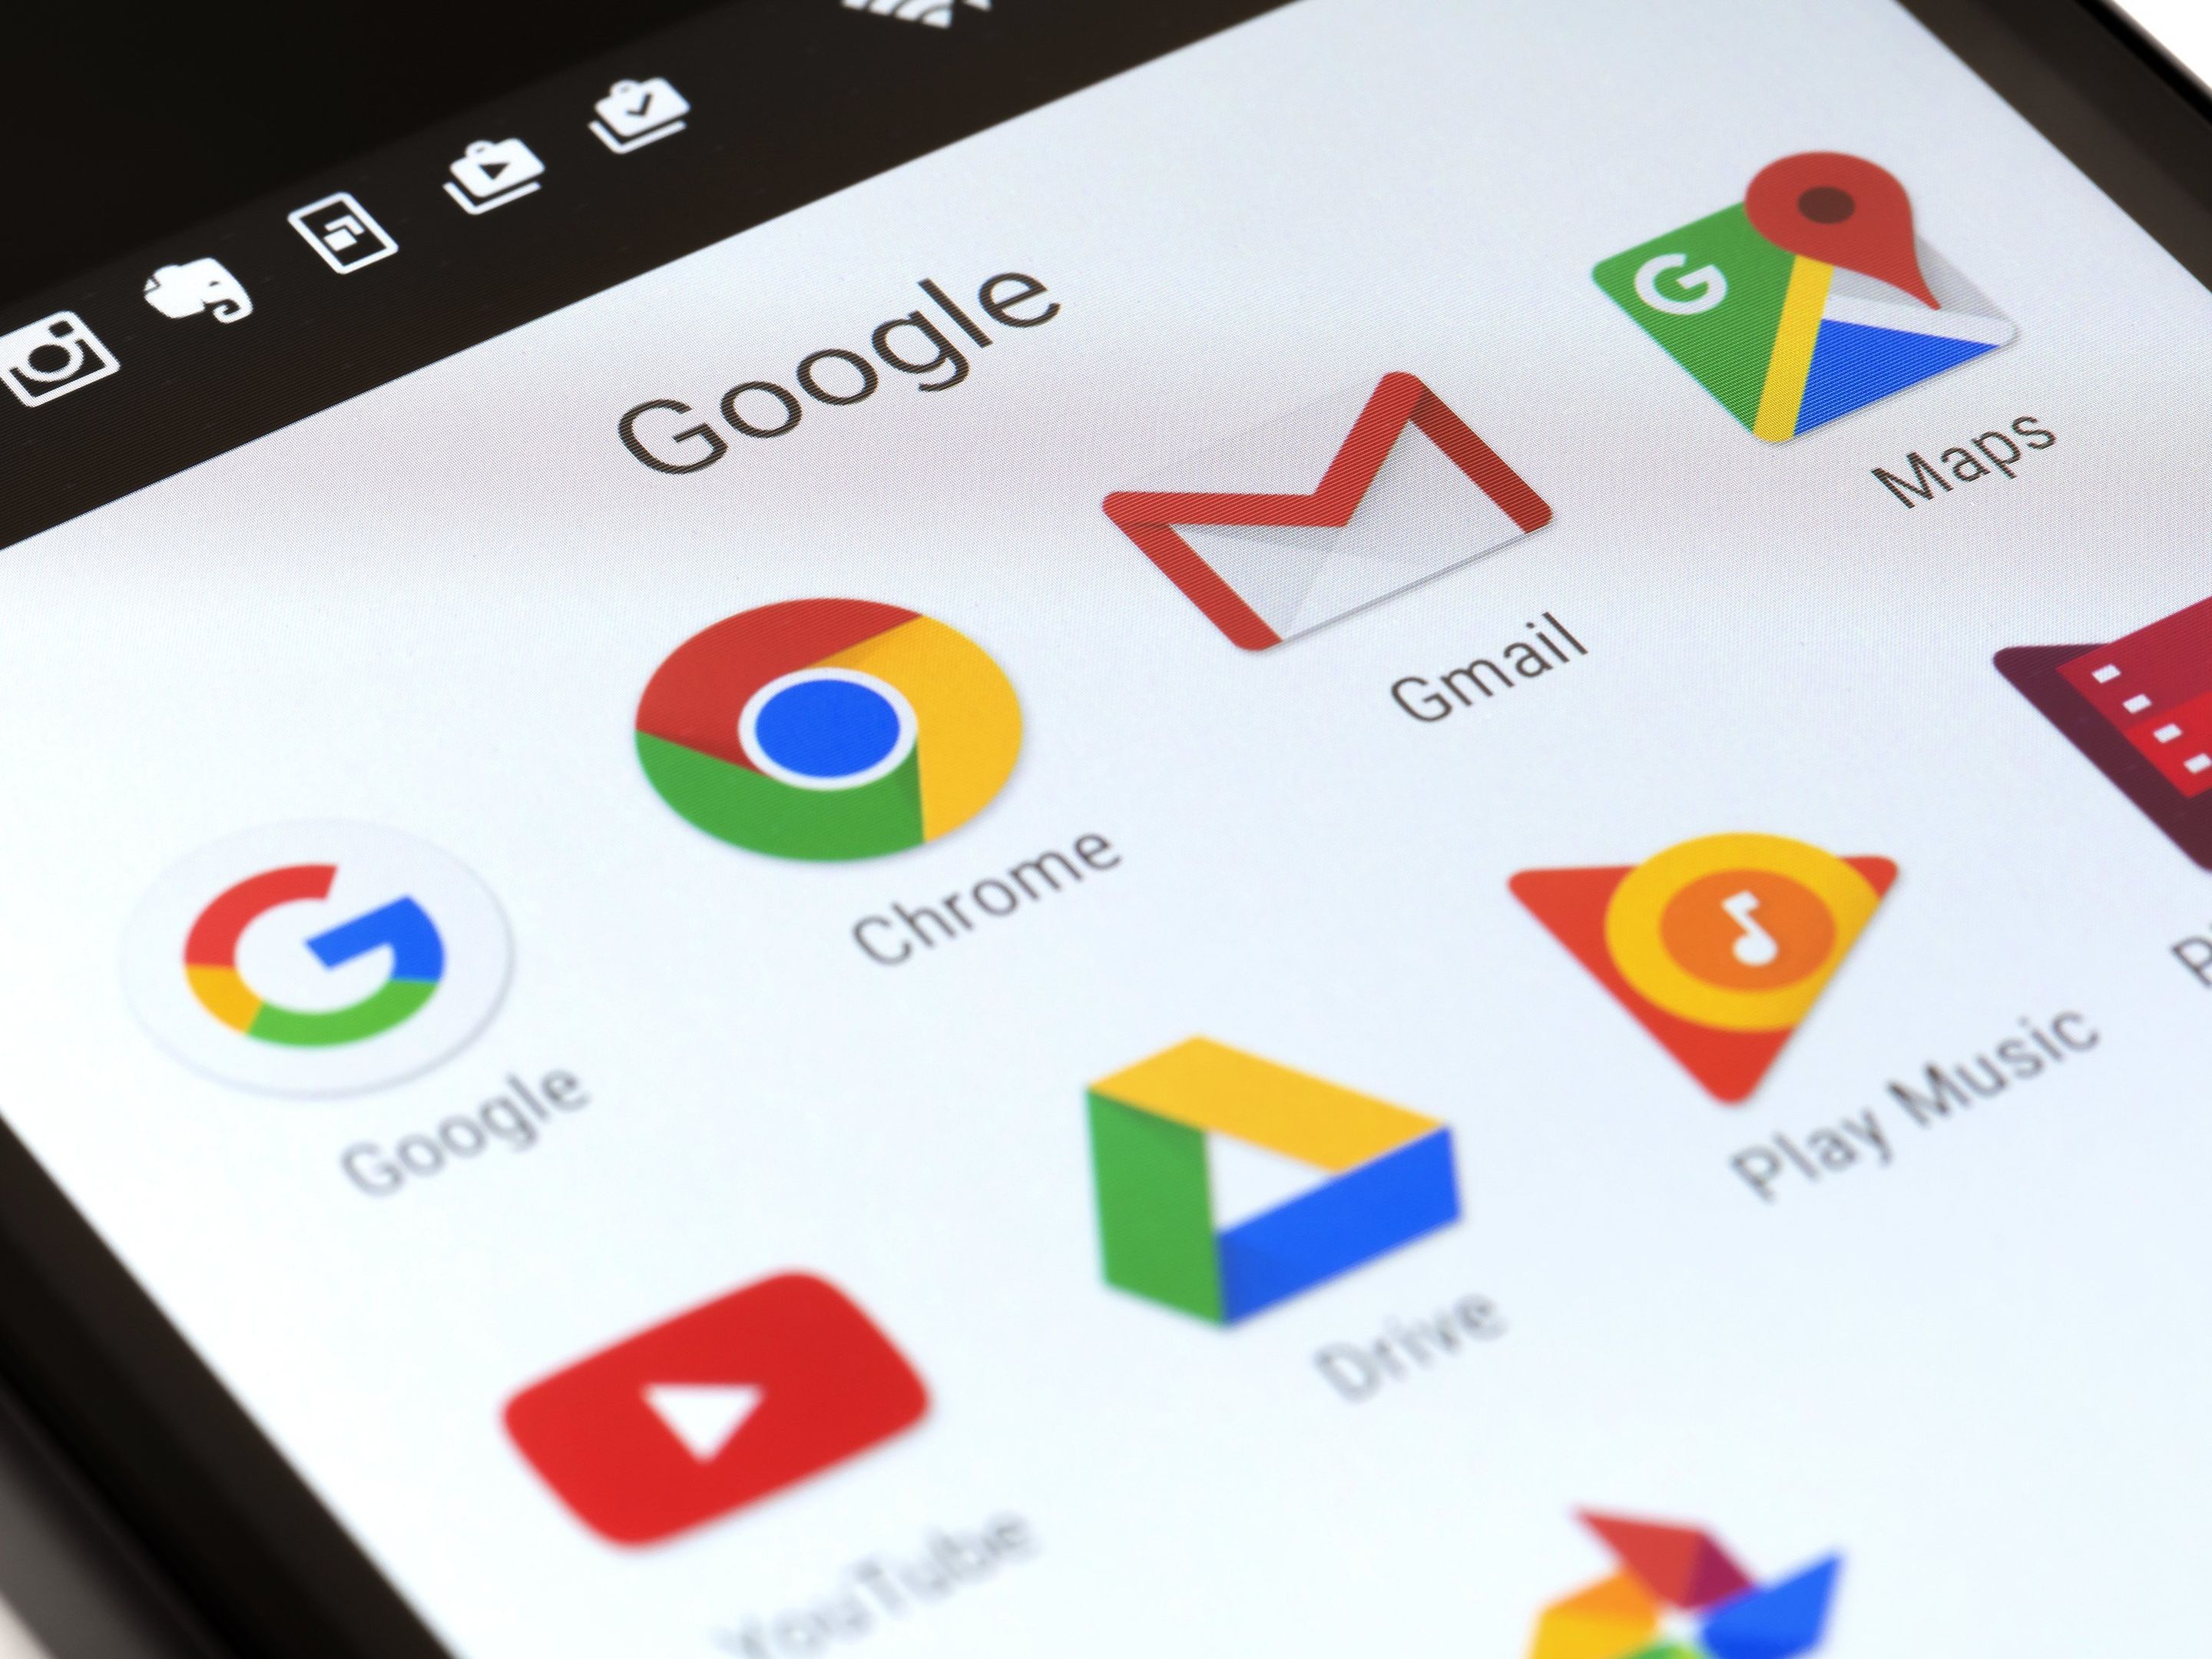 Google is defending its policy to allow third-party apps to access and share data from Gmail accounts